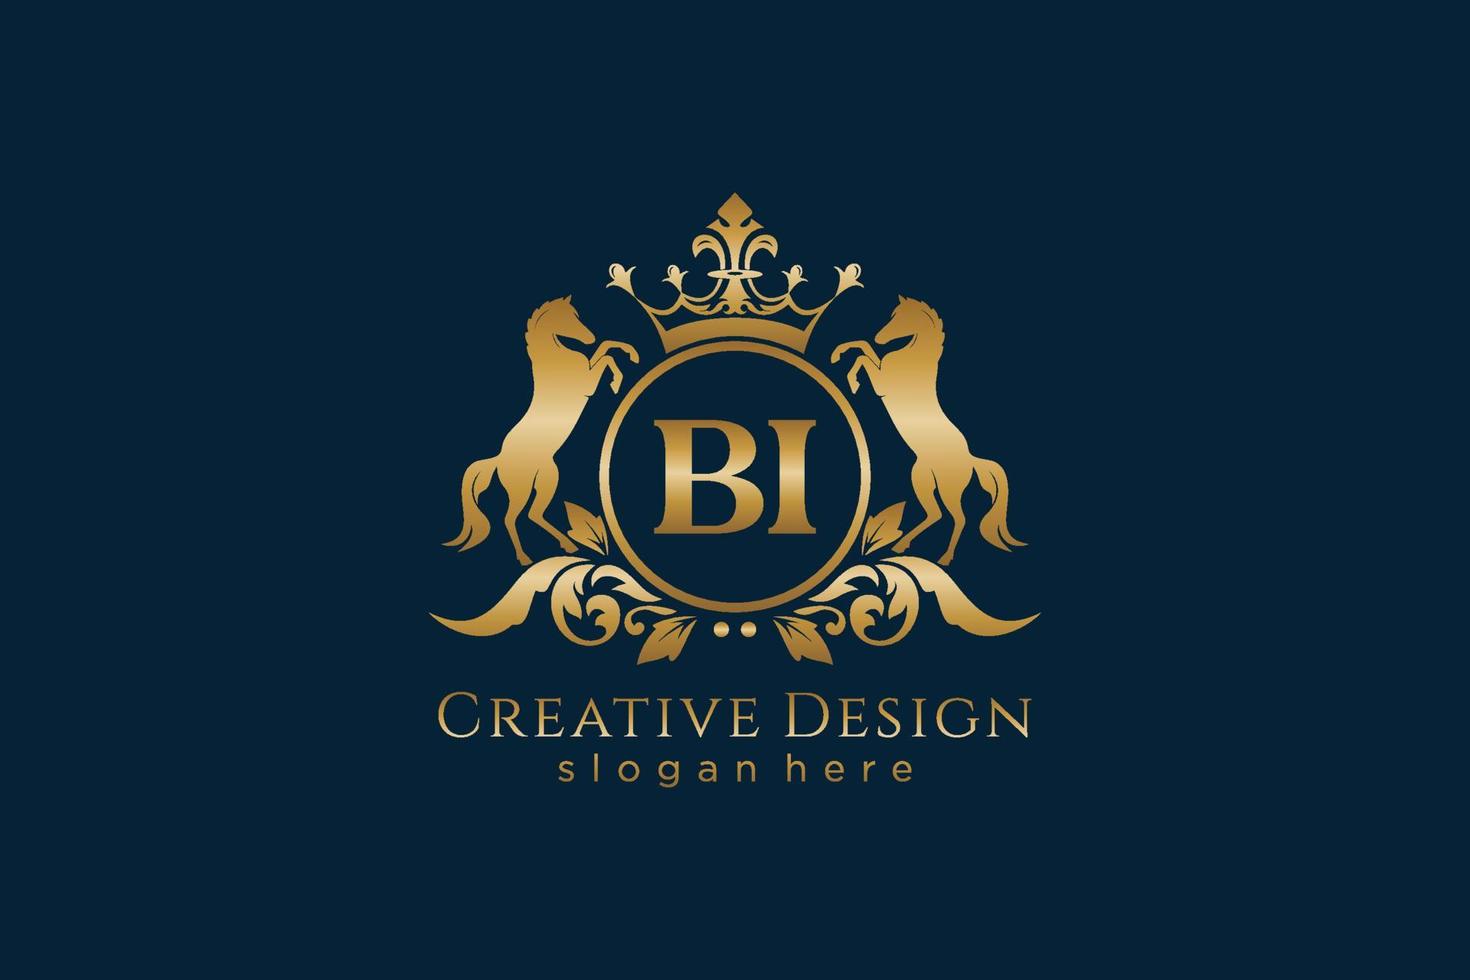 initial BI Retro golden crest with circle and two horses, badge template with scrolls and royal crown - perfect for luxurious branding projects vector